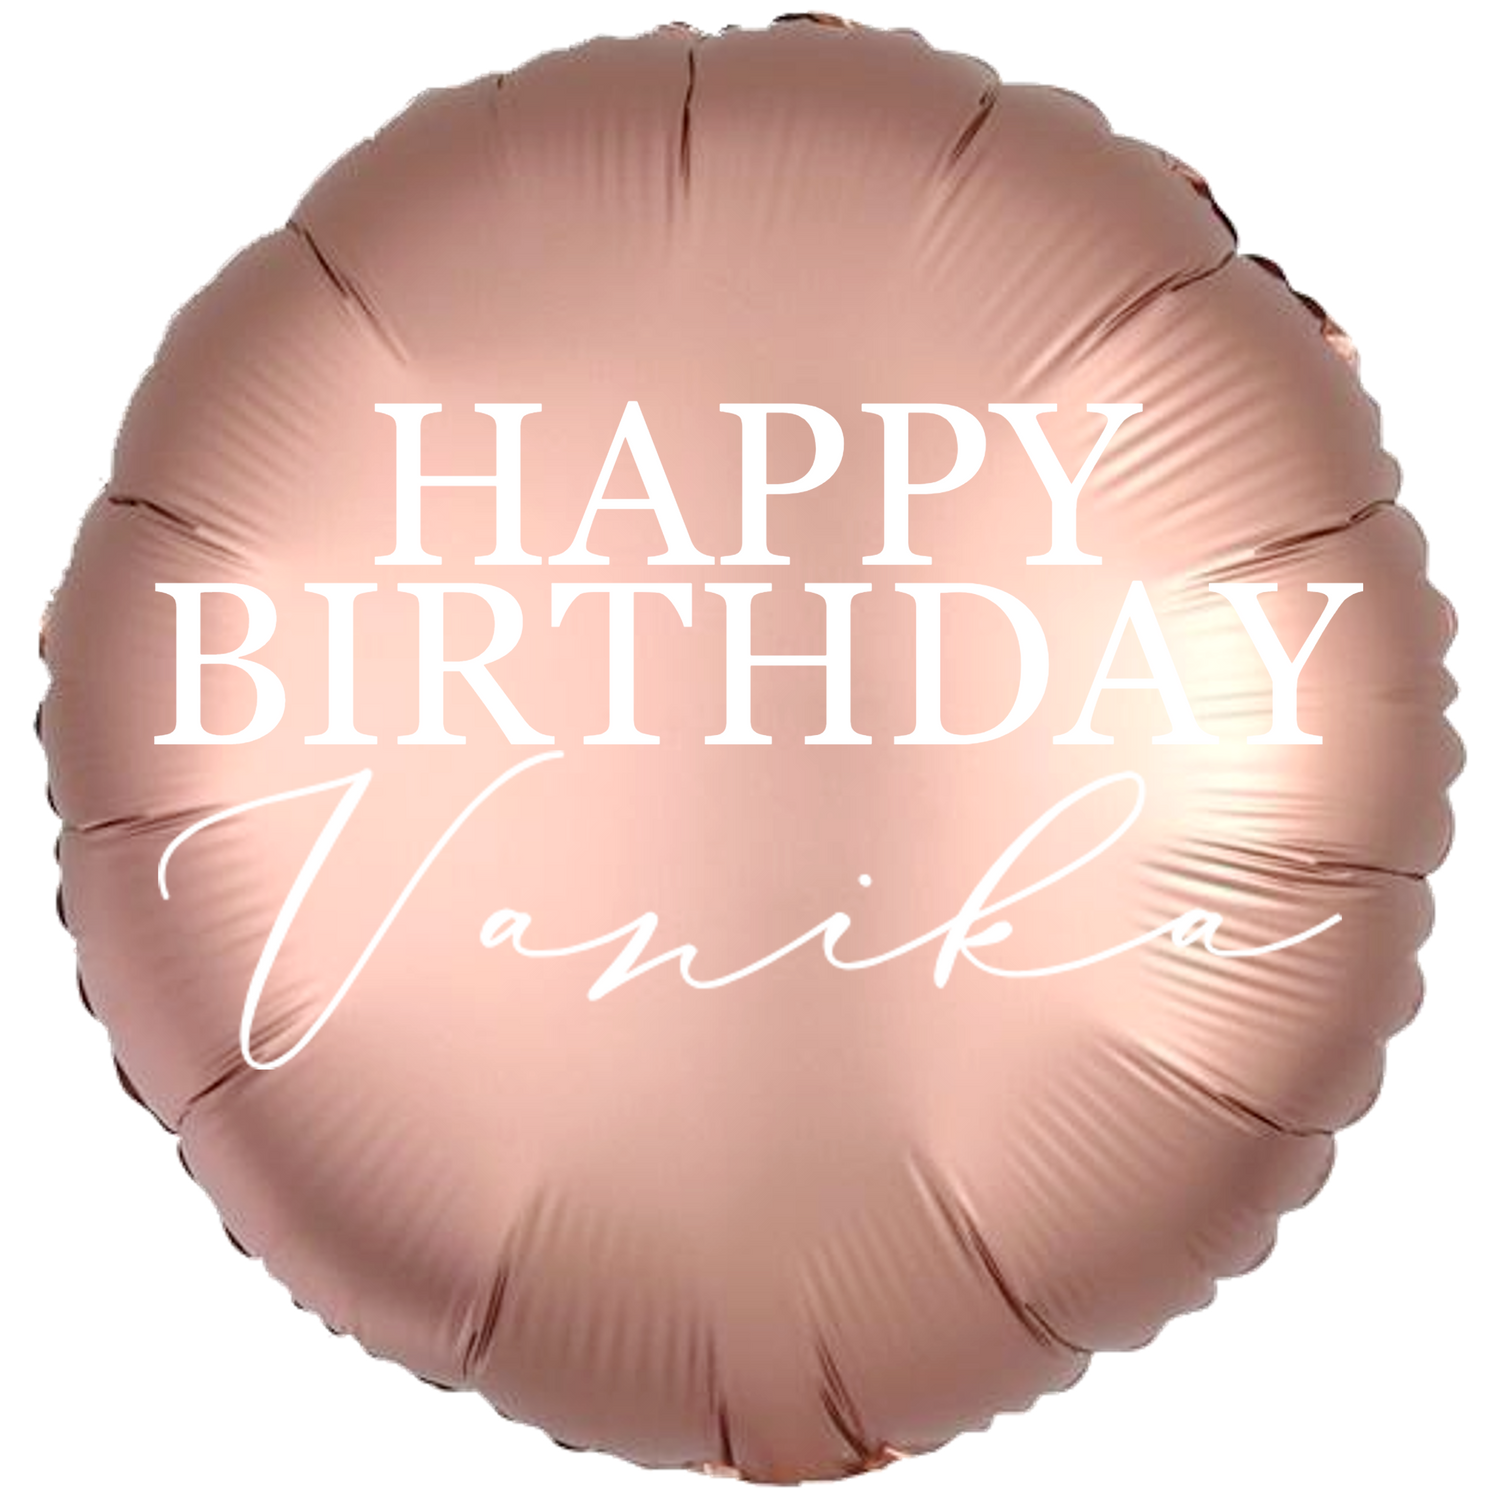 Personalized/Customized Custom Name/Text Rose Gold Round Foil/Mylar Balloons For Six Months/First/Second/Third/Sixteenth/Twenty-First/Thirty/Forty/Fifty/Sixty/Seventieth Birthday, Milestone Birthday or a Special Themed Birthday Event. Supports Helium/Air, Luxury Bespoke Balloons Are a Perfect Surprise For Your Baby, Wife, Mom, Dad, Brother, Sister, Friends & Loved Ones